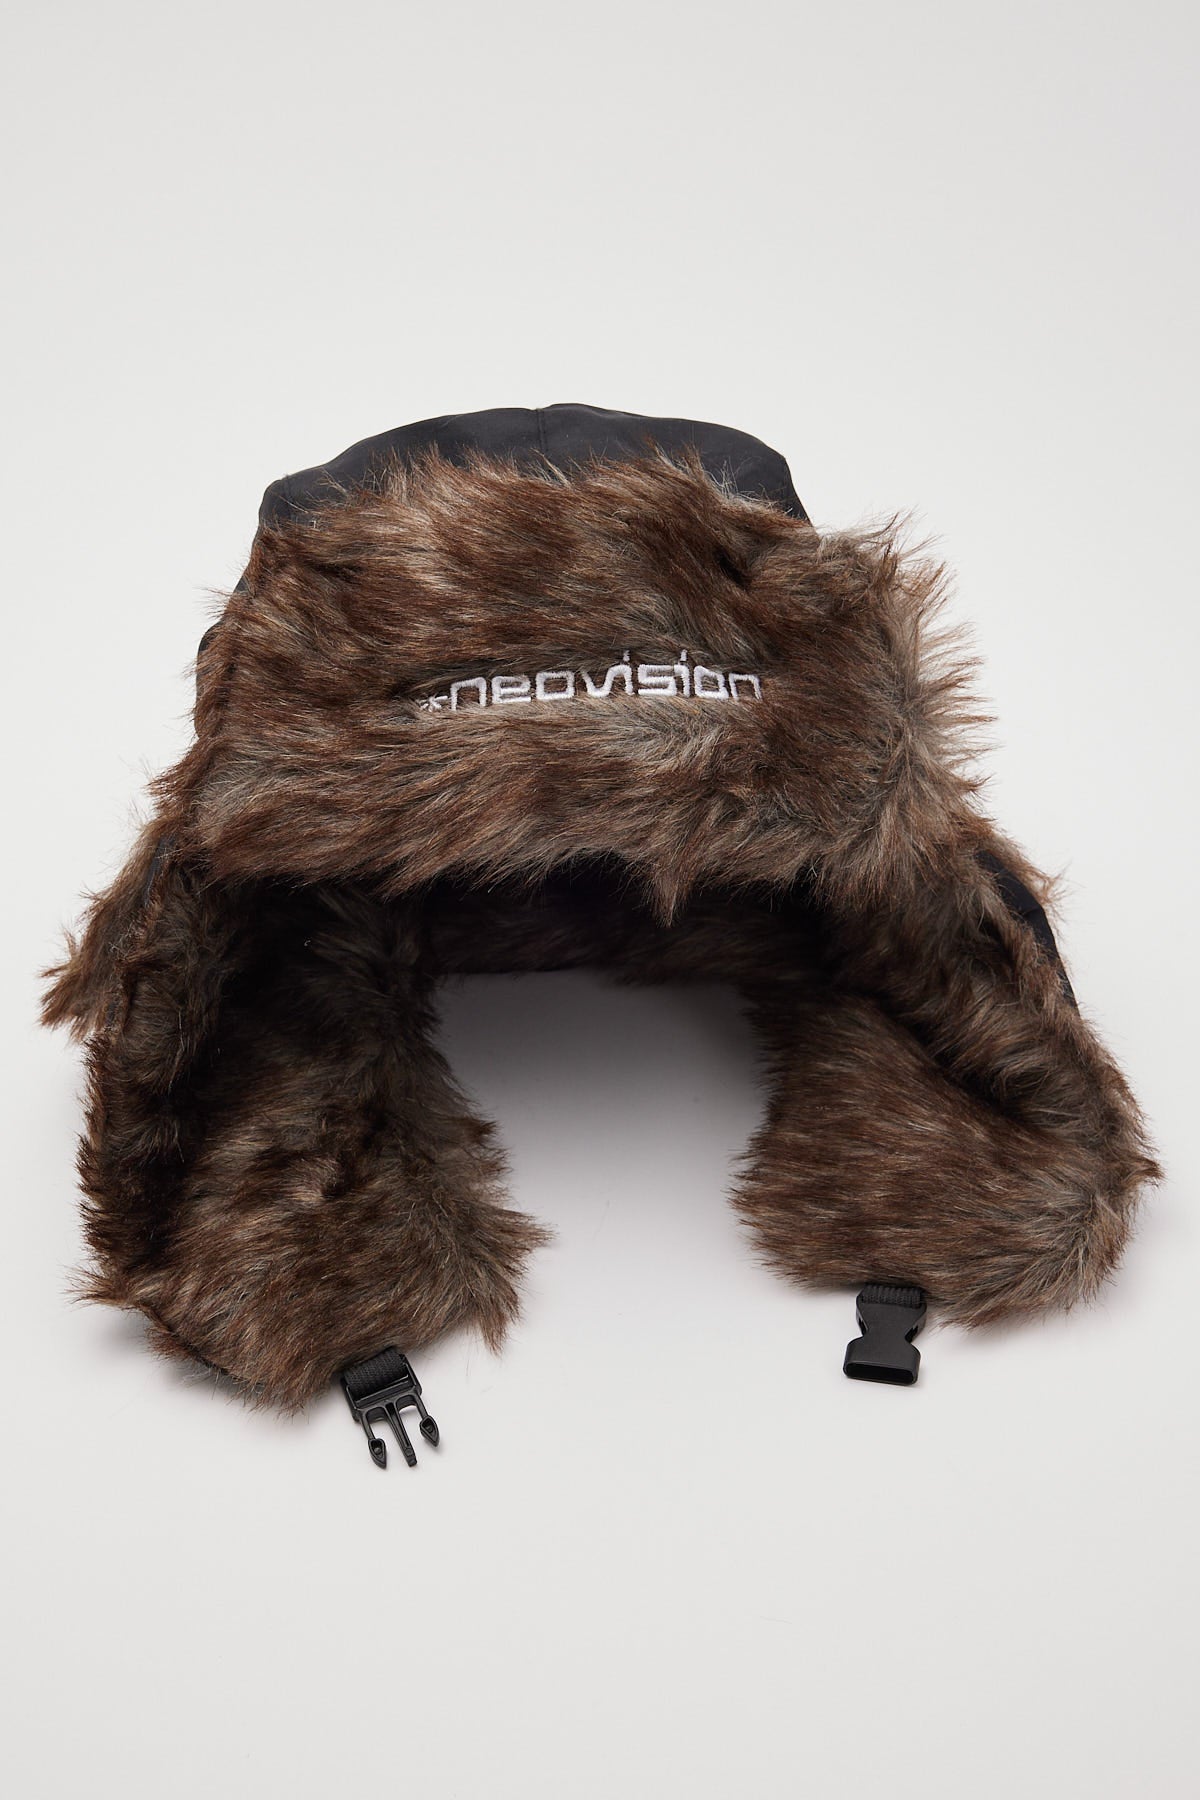 Neovision For The People Trapper Hat Black